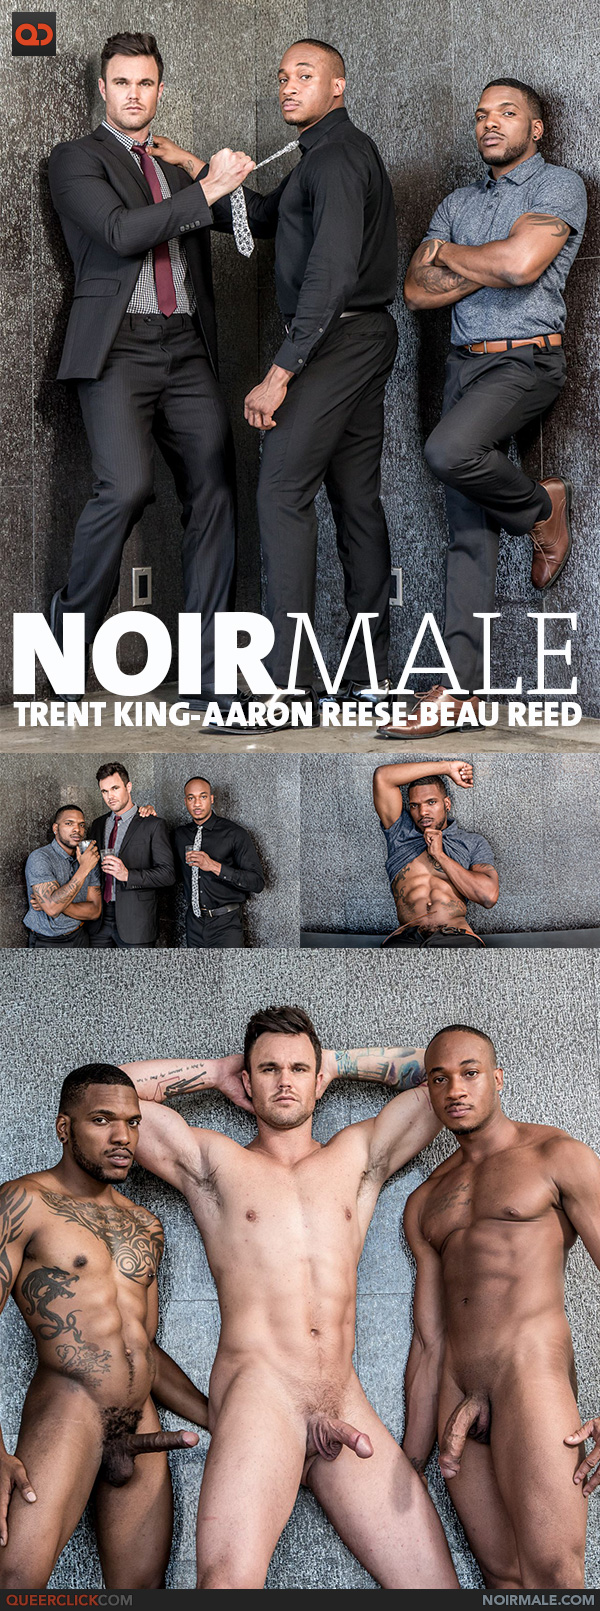 Noir Male: Trent King, Aaron Reese and Beau Reed